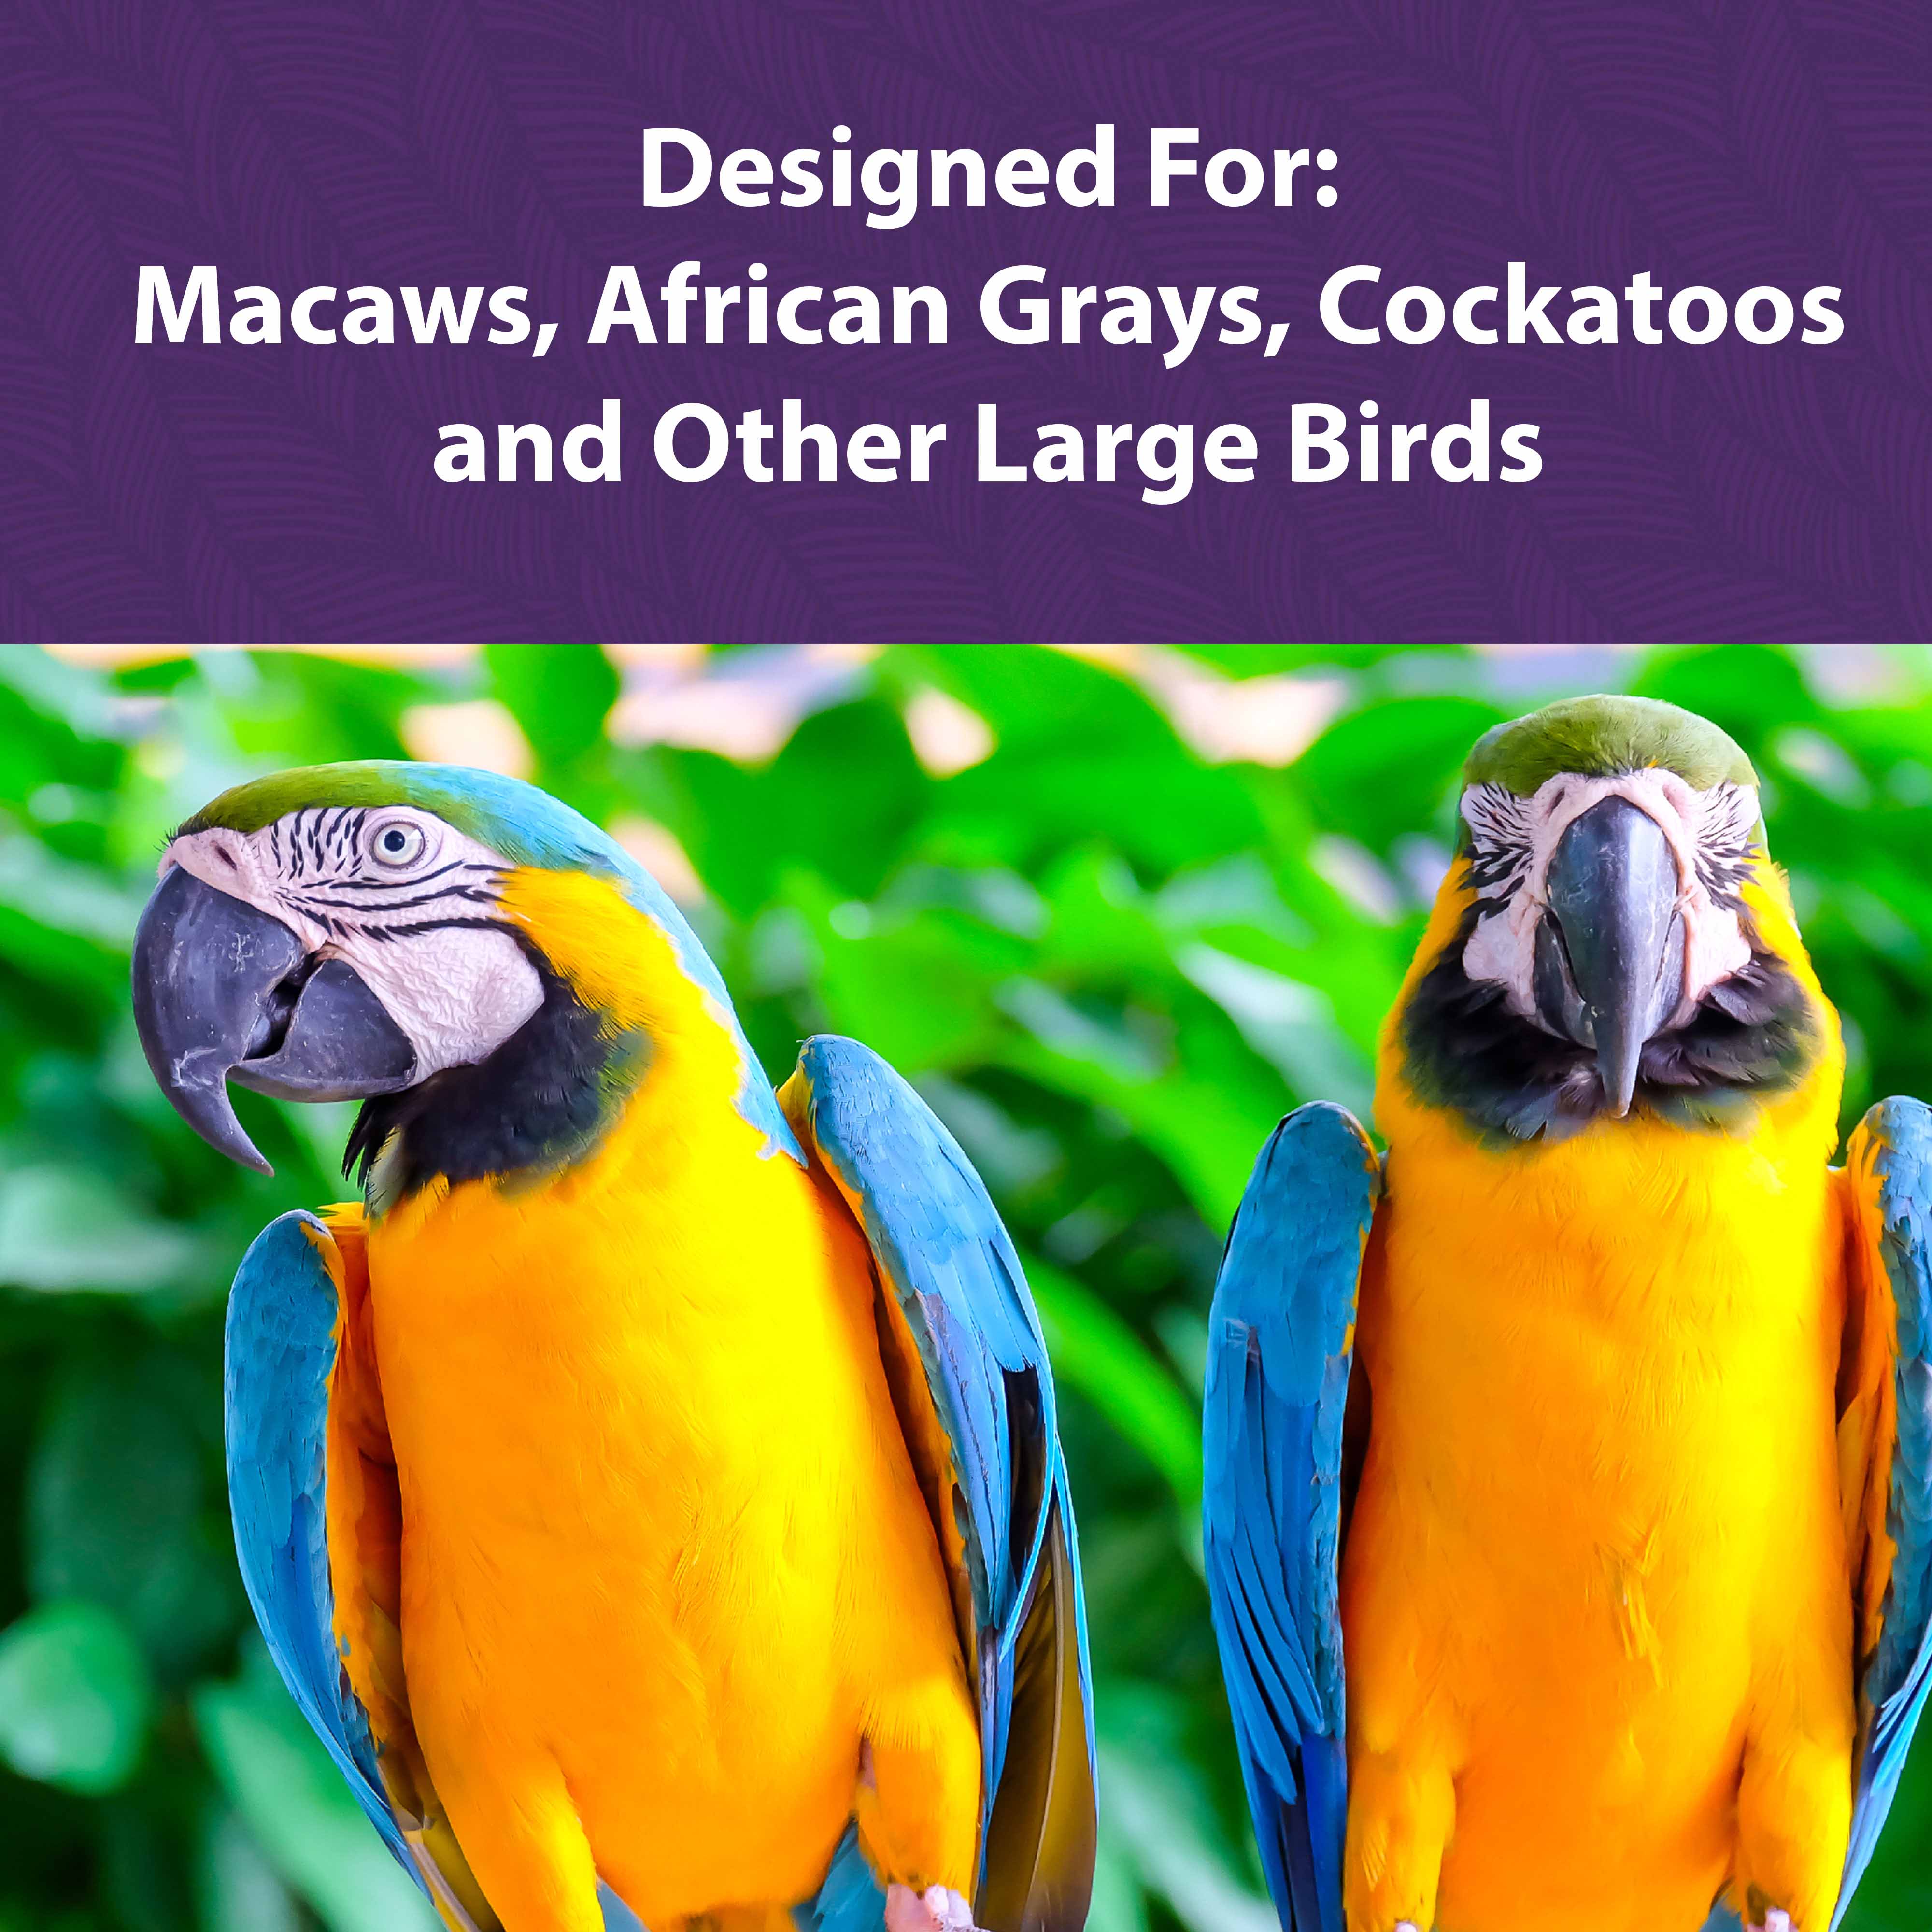 Two Blue and yellow Macaws